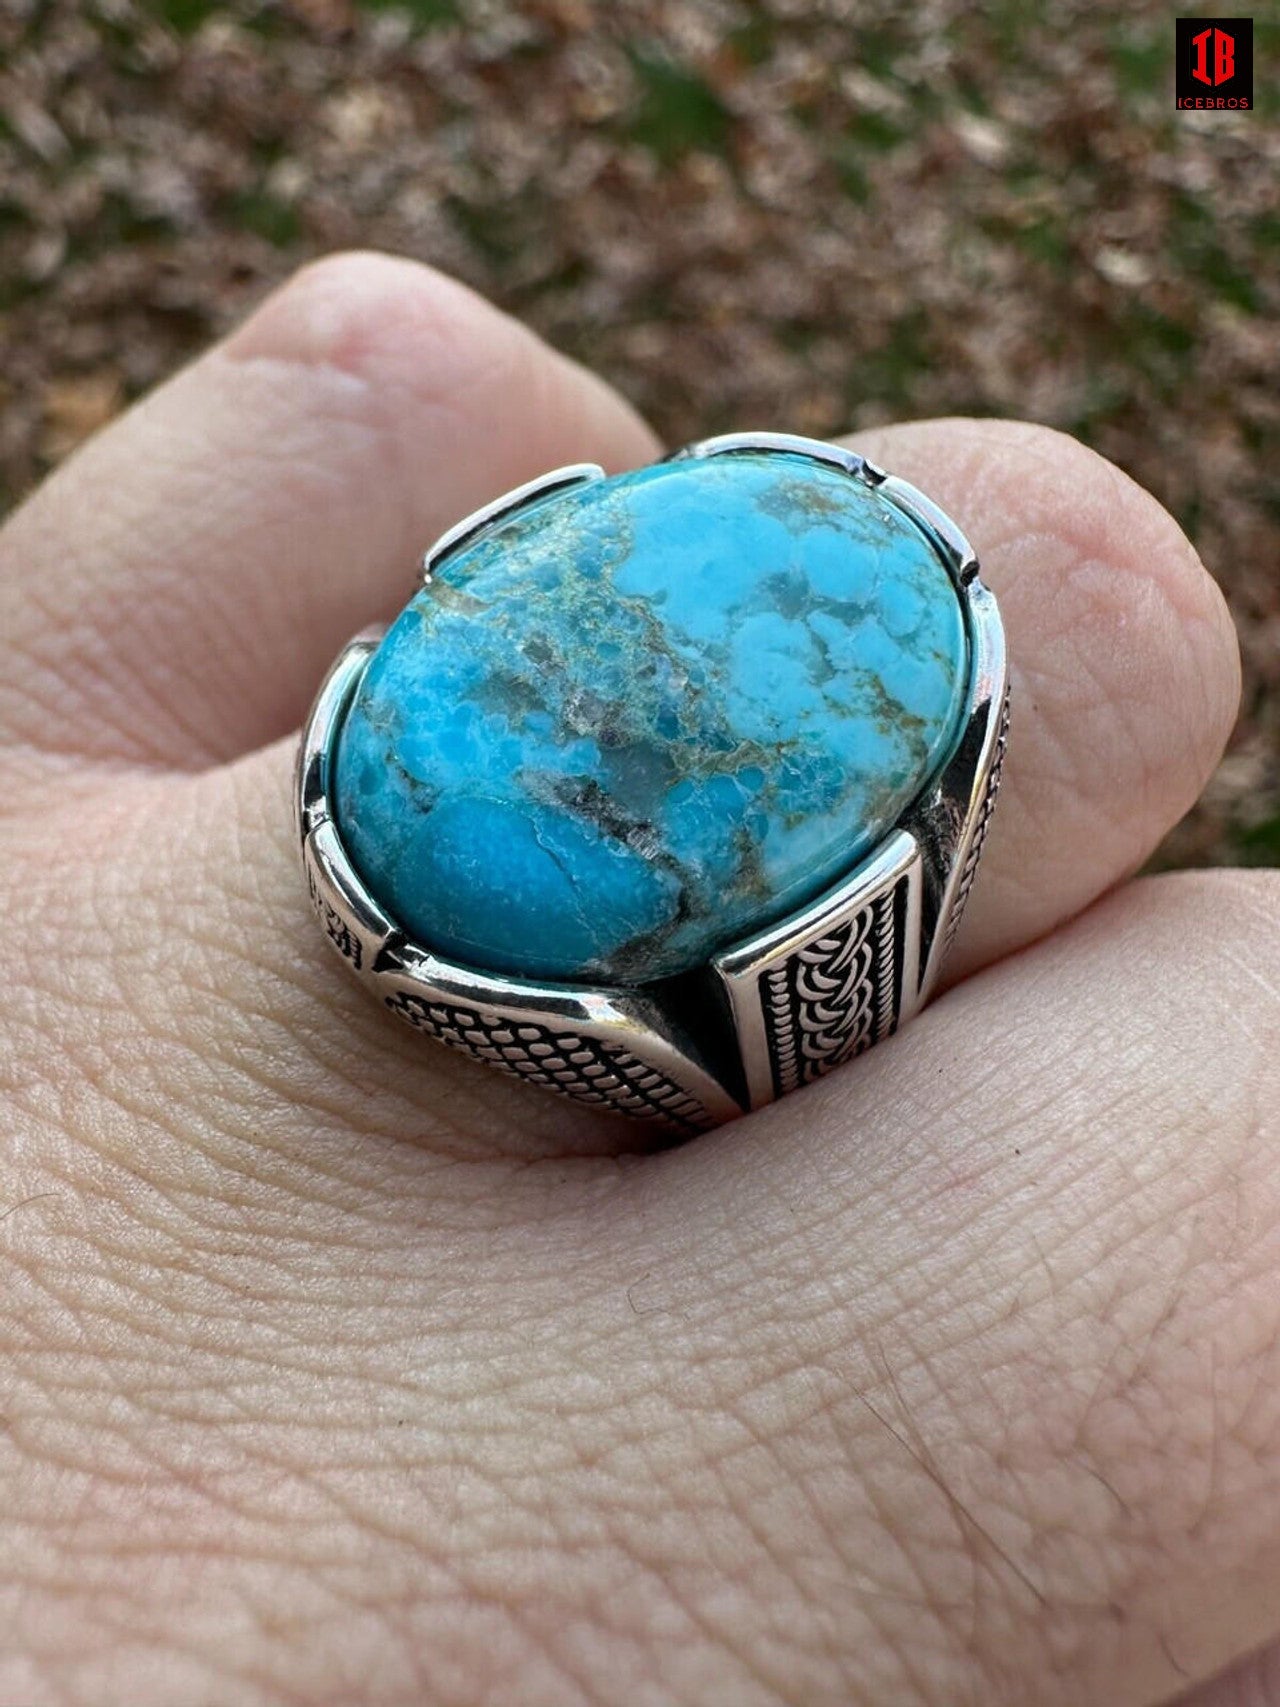 A man's hand showcasing a blue oval cut turquoise stone ring, exuding elegance and style.